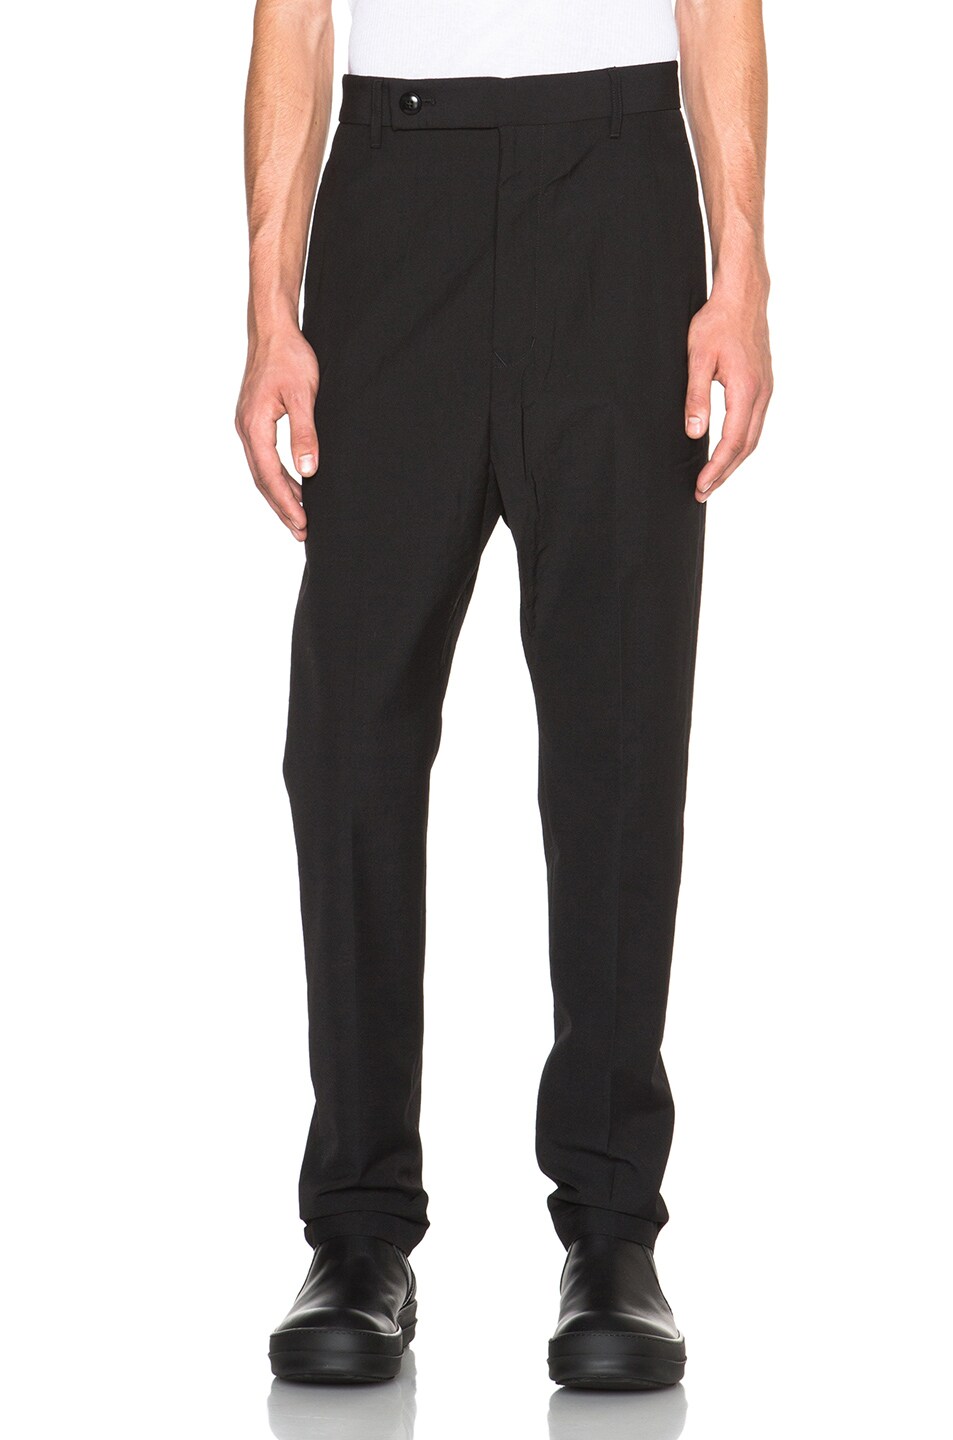 Rick Owens Astaire Tailored Pants in Black | FWRD